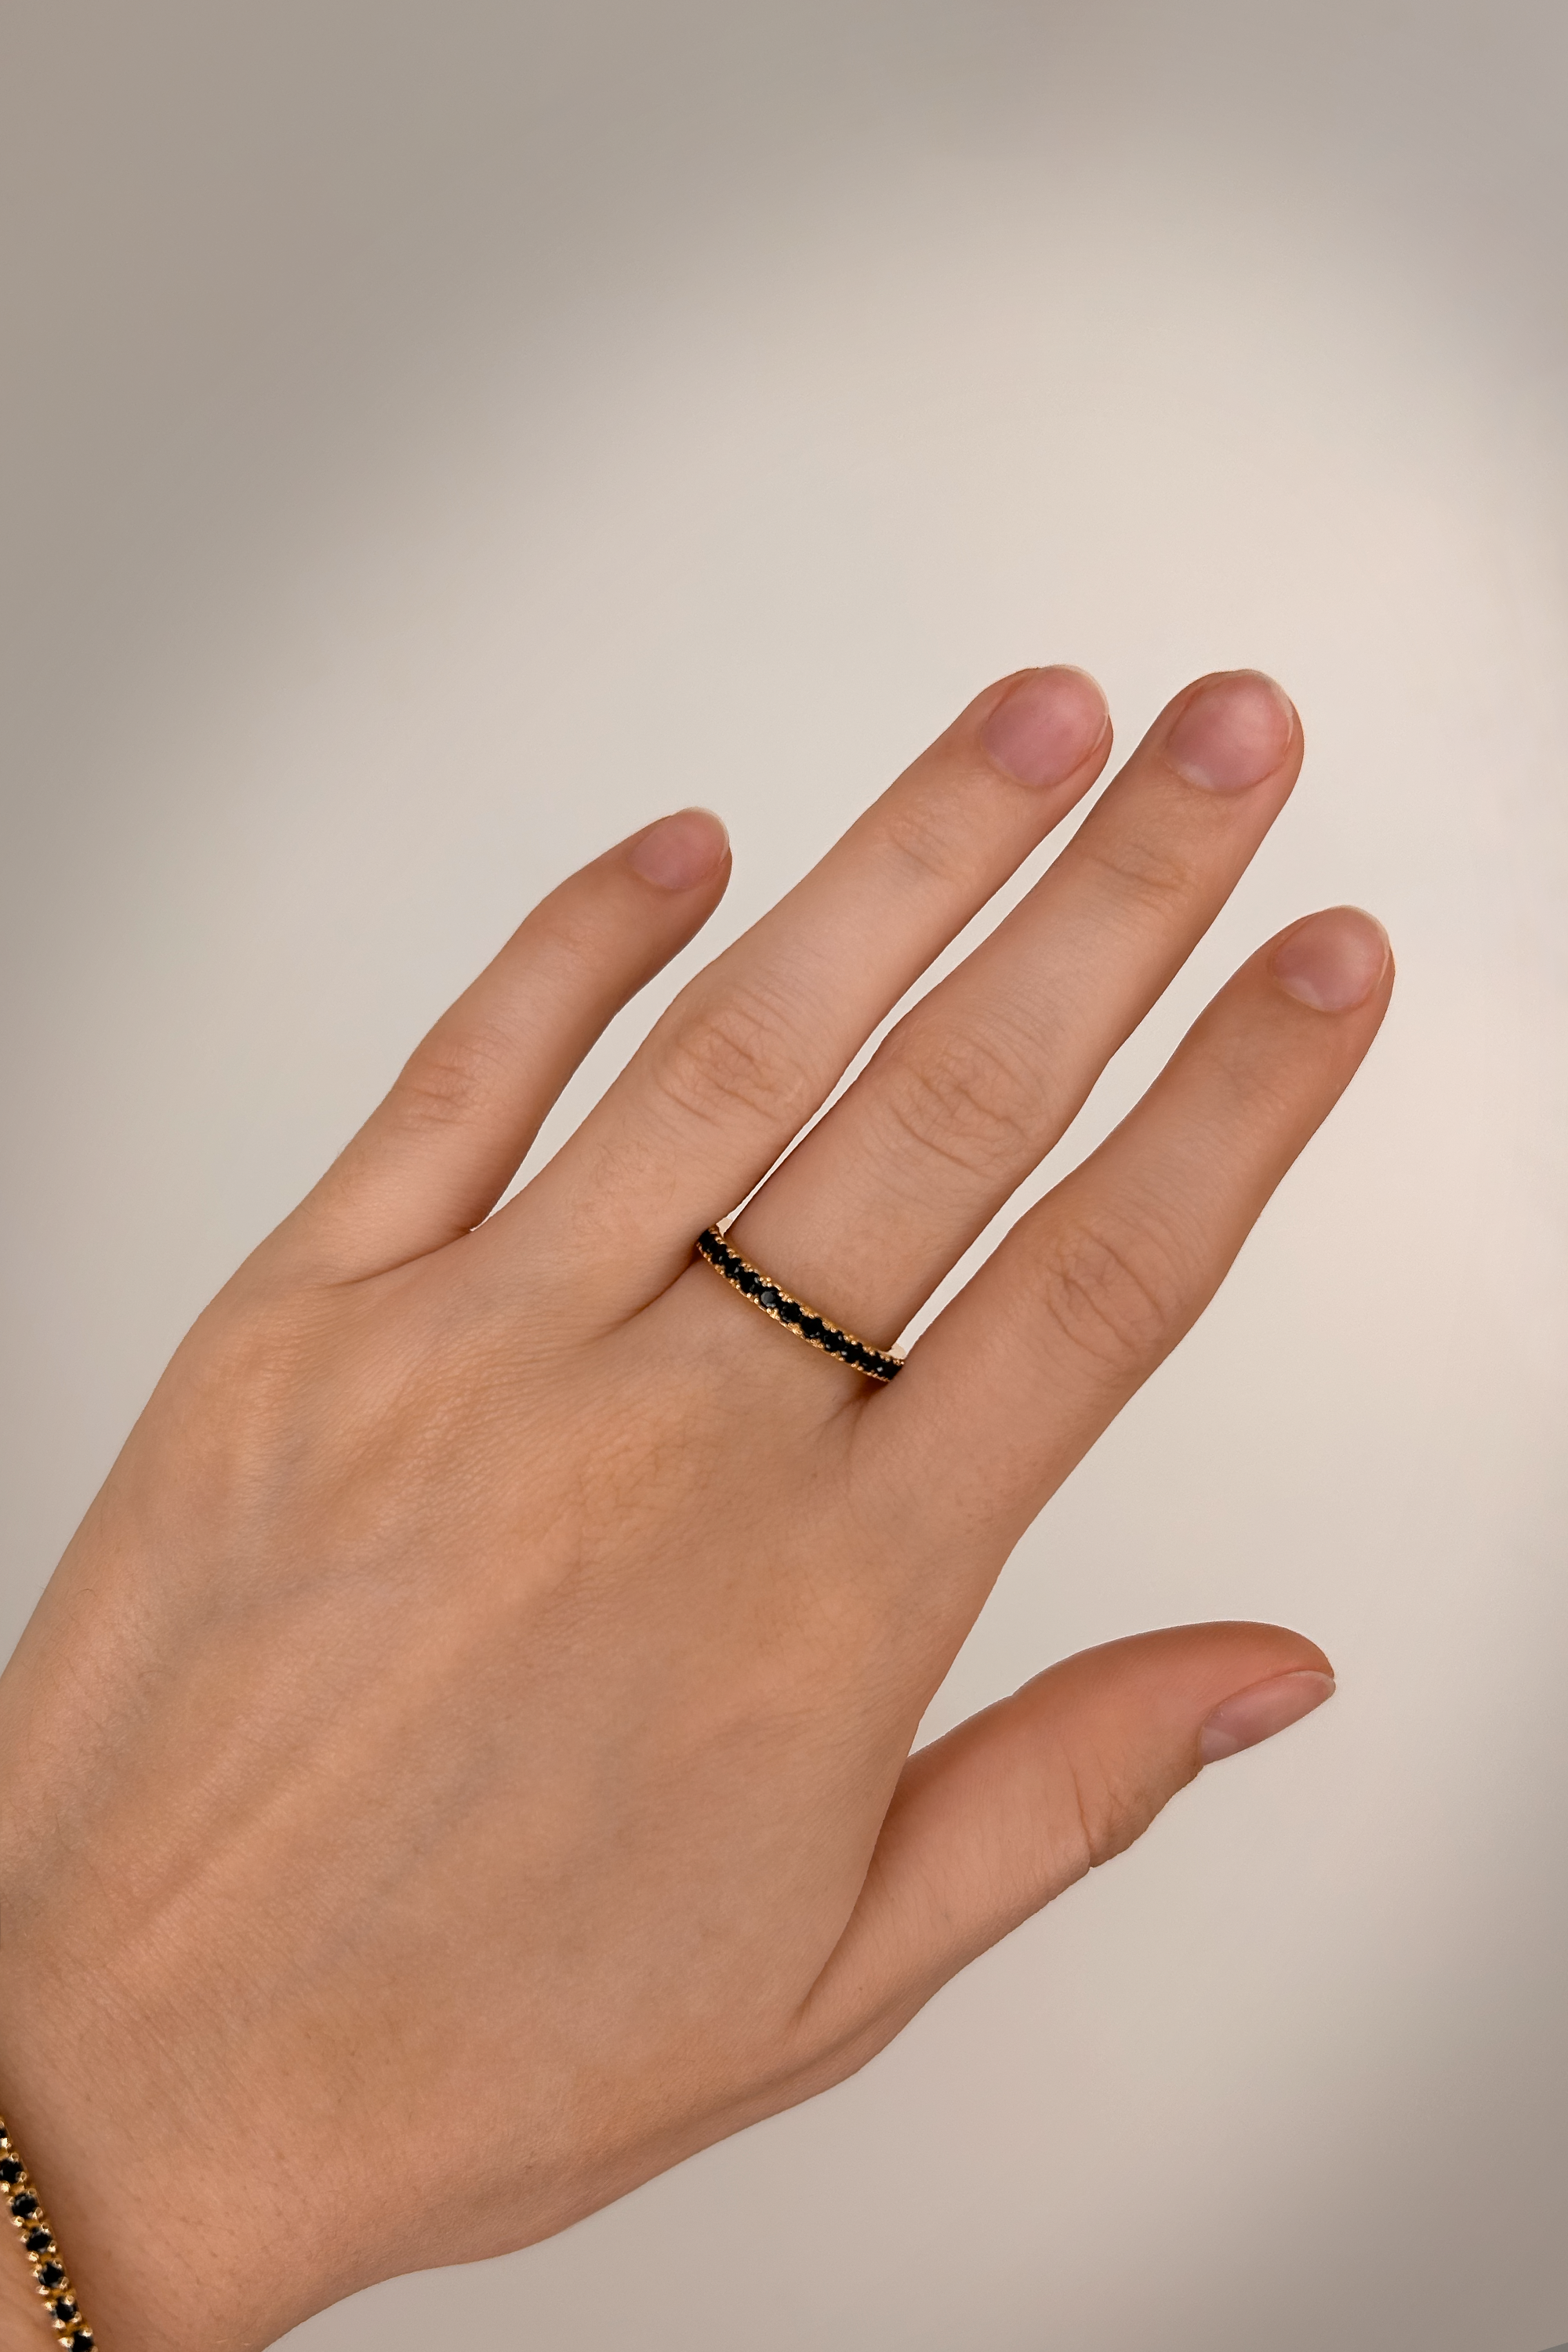 Complete Ring